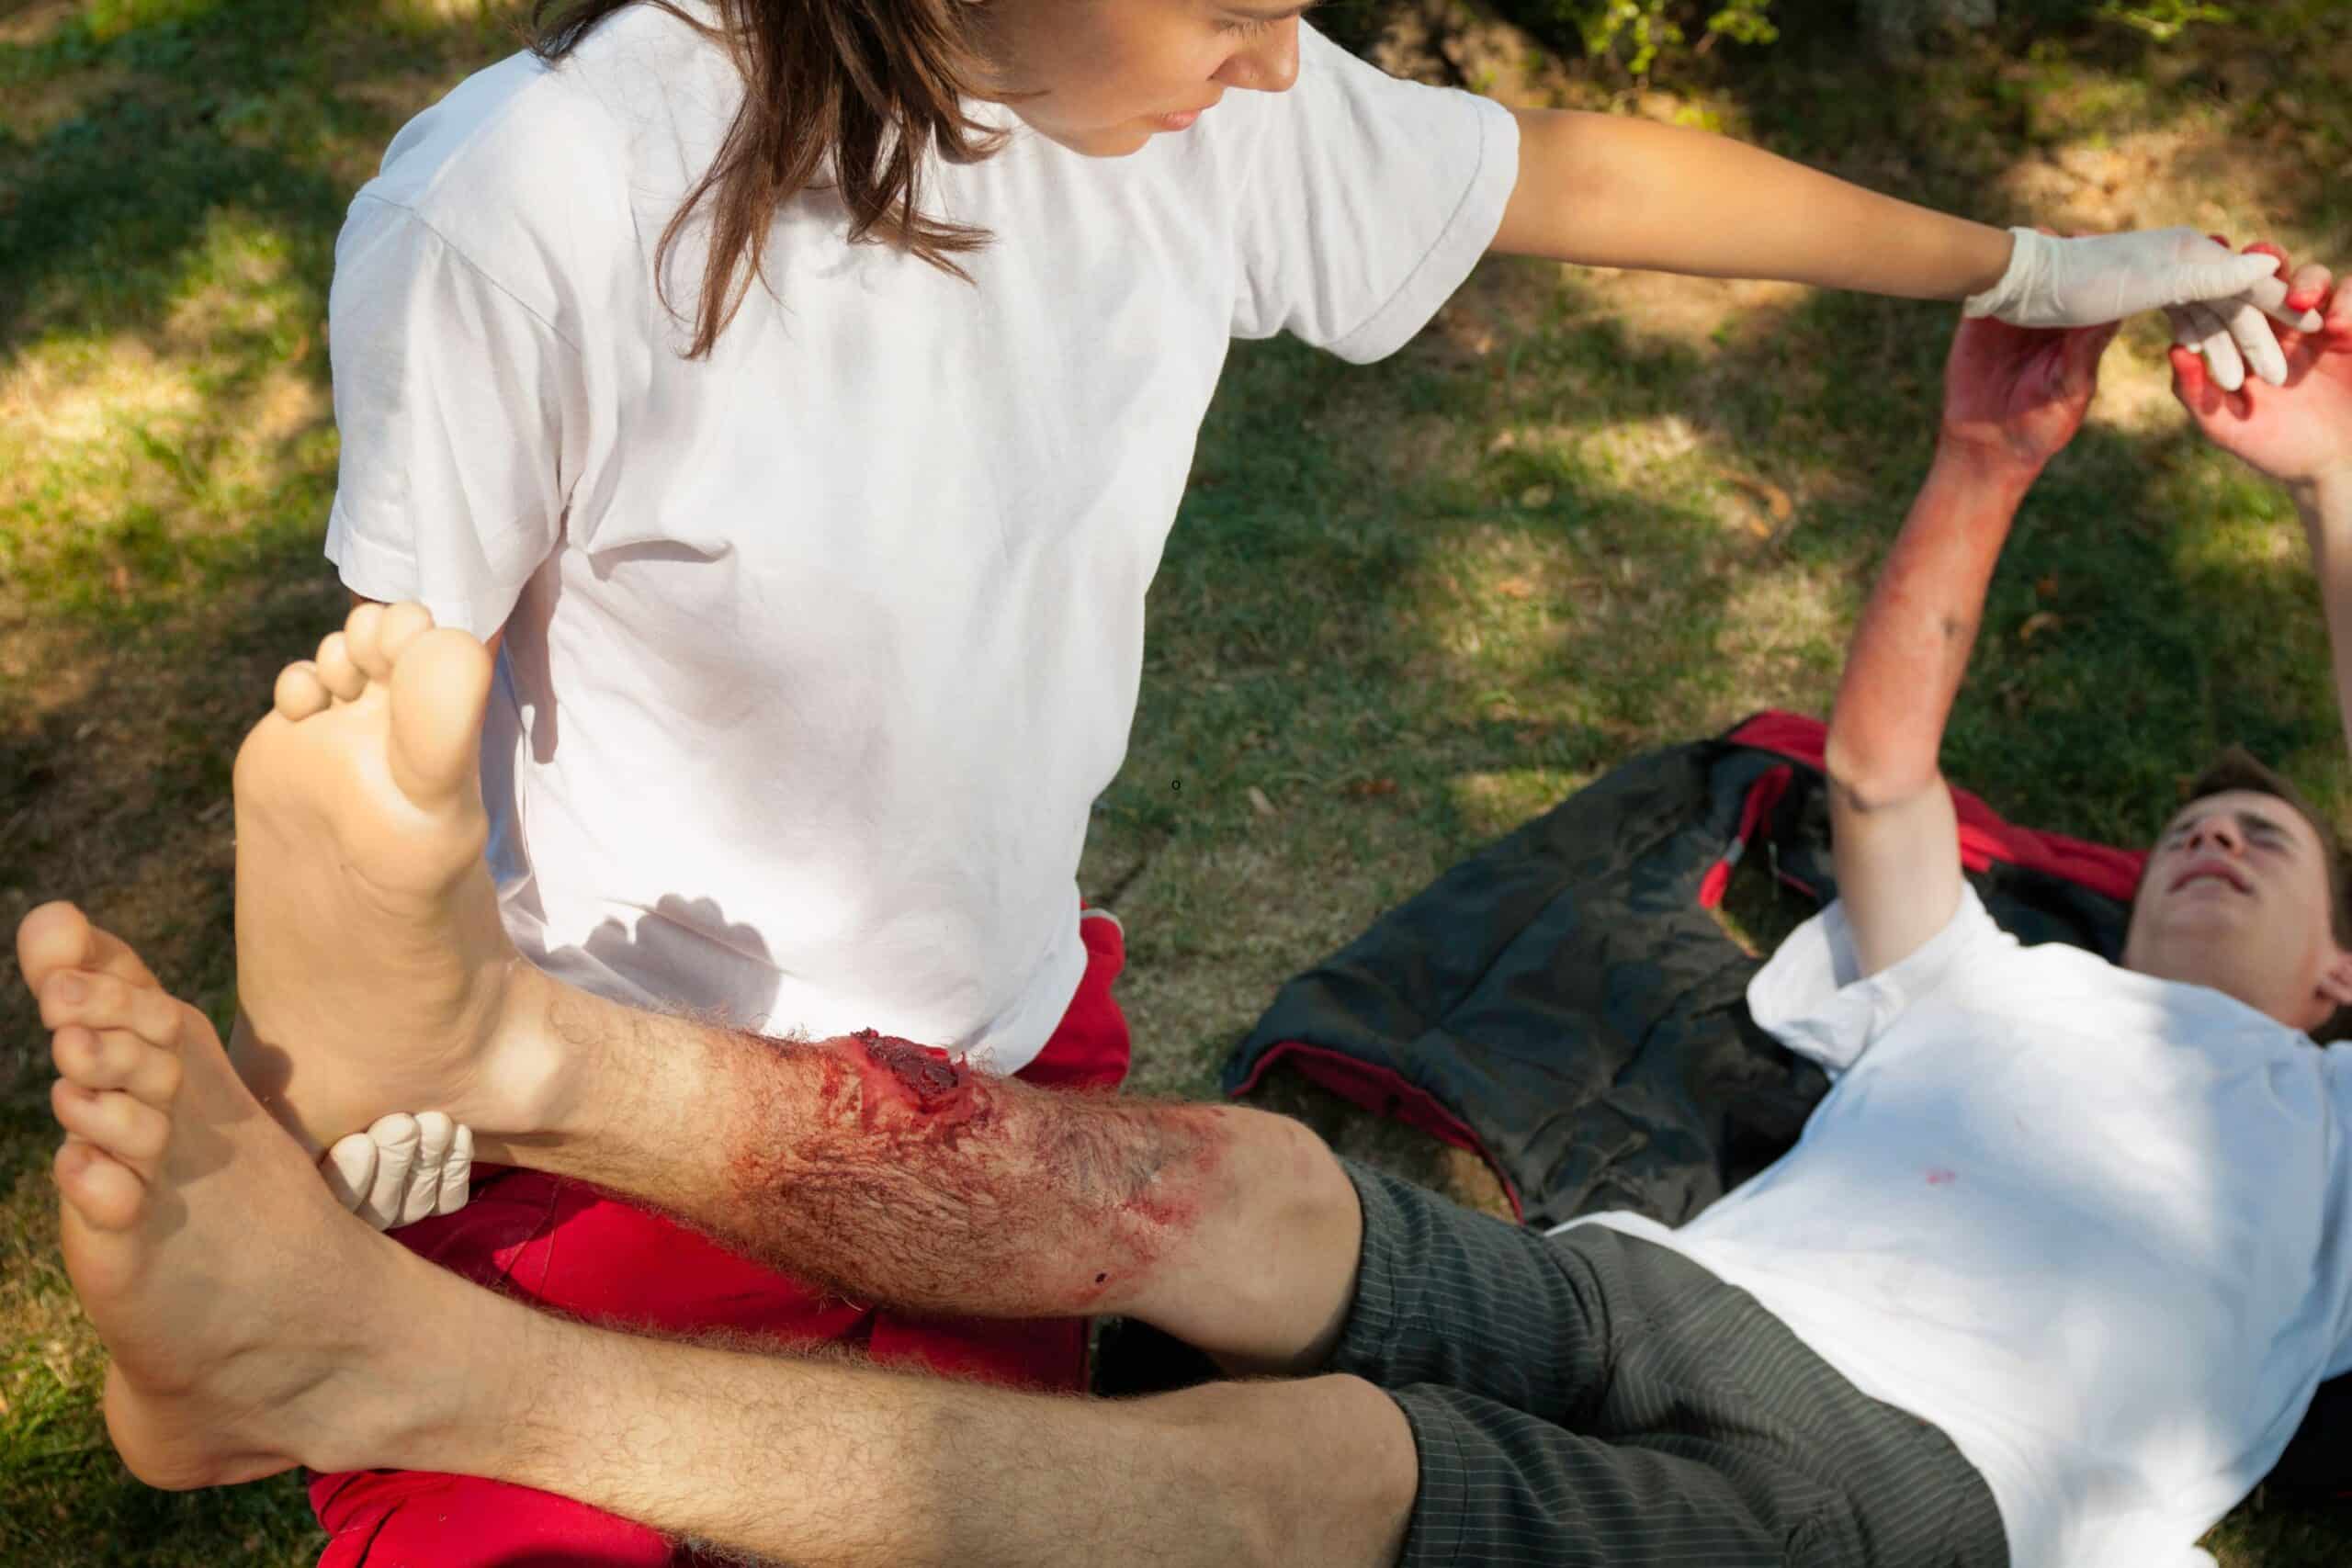 Burn Injury Victims in MN: Legal Options and Rehabilitation Support